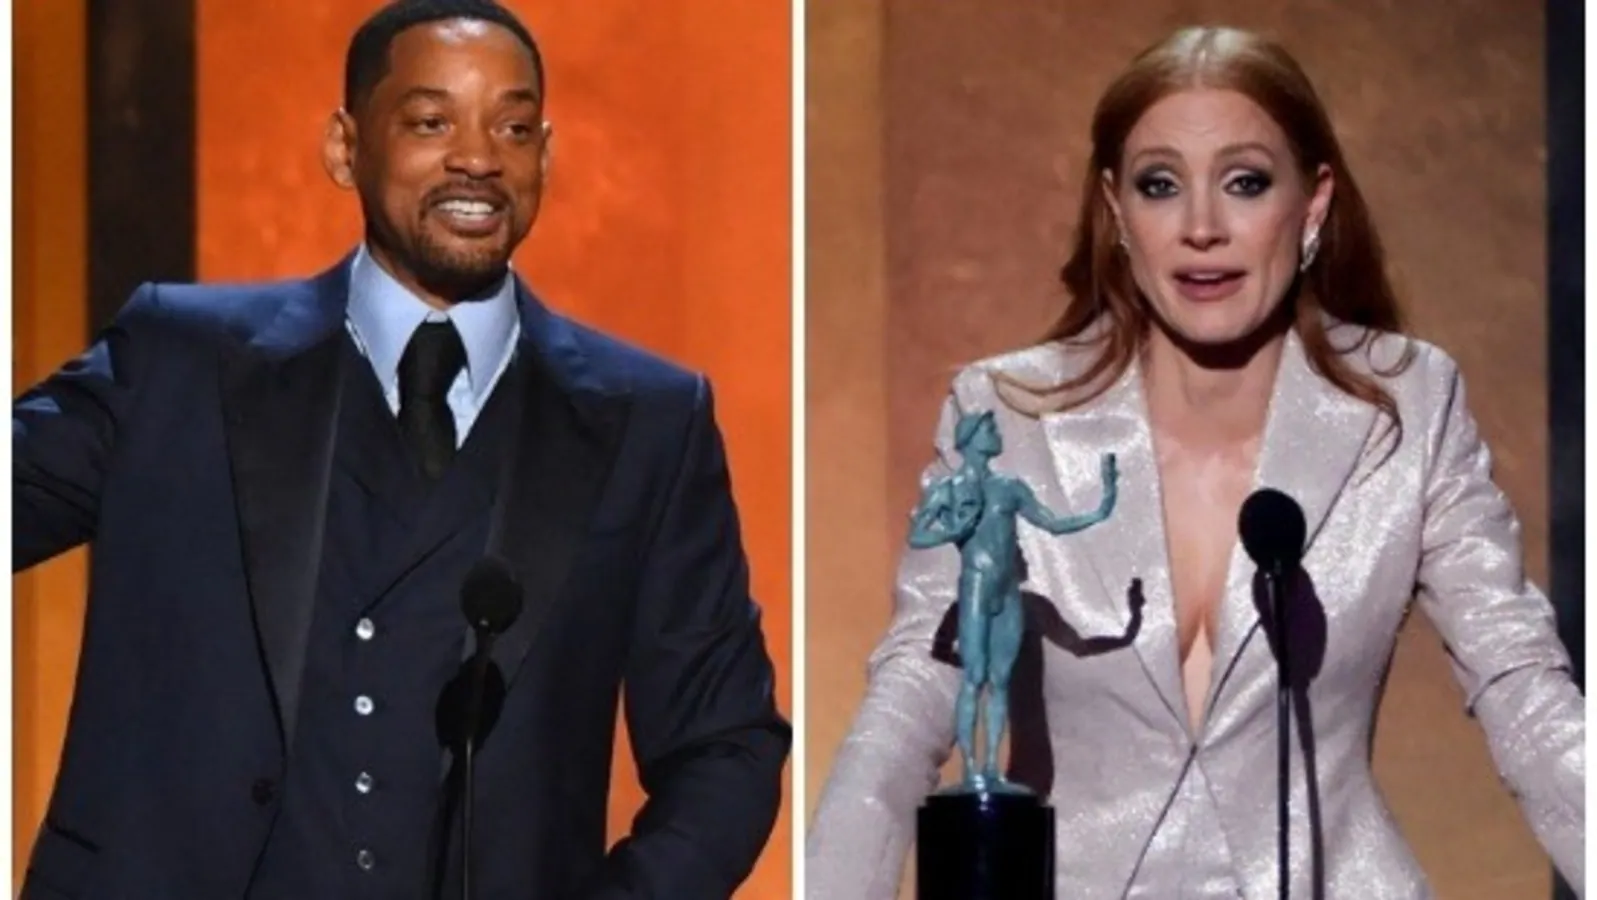 SAG Awards 2022: Will Smith and Jessica Chastain take top prizes; CODA, Squid Game win big. Full list of winners